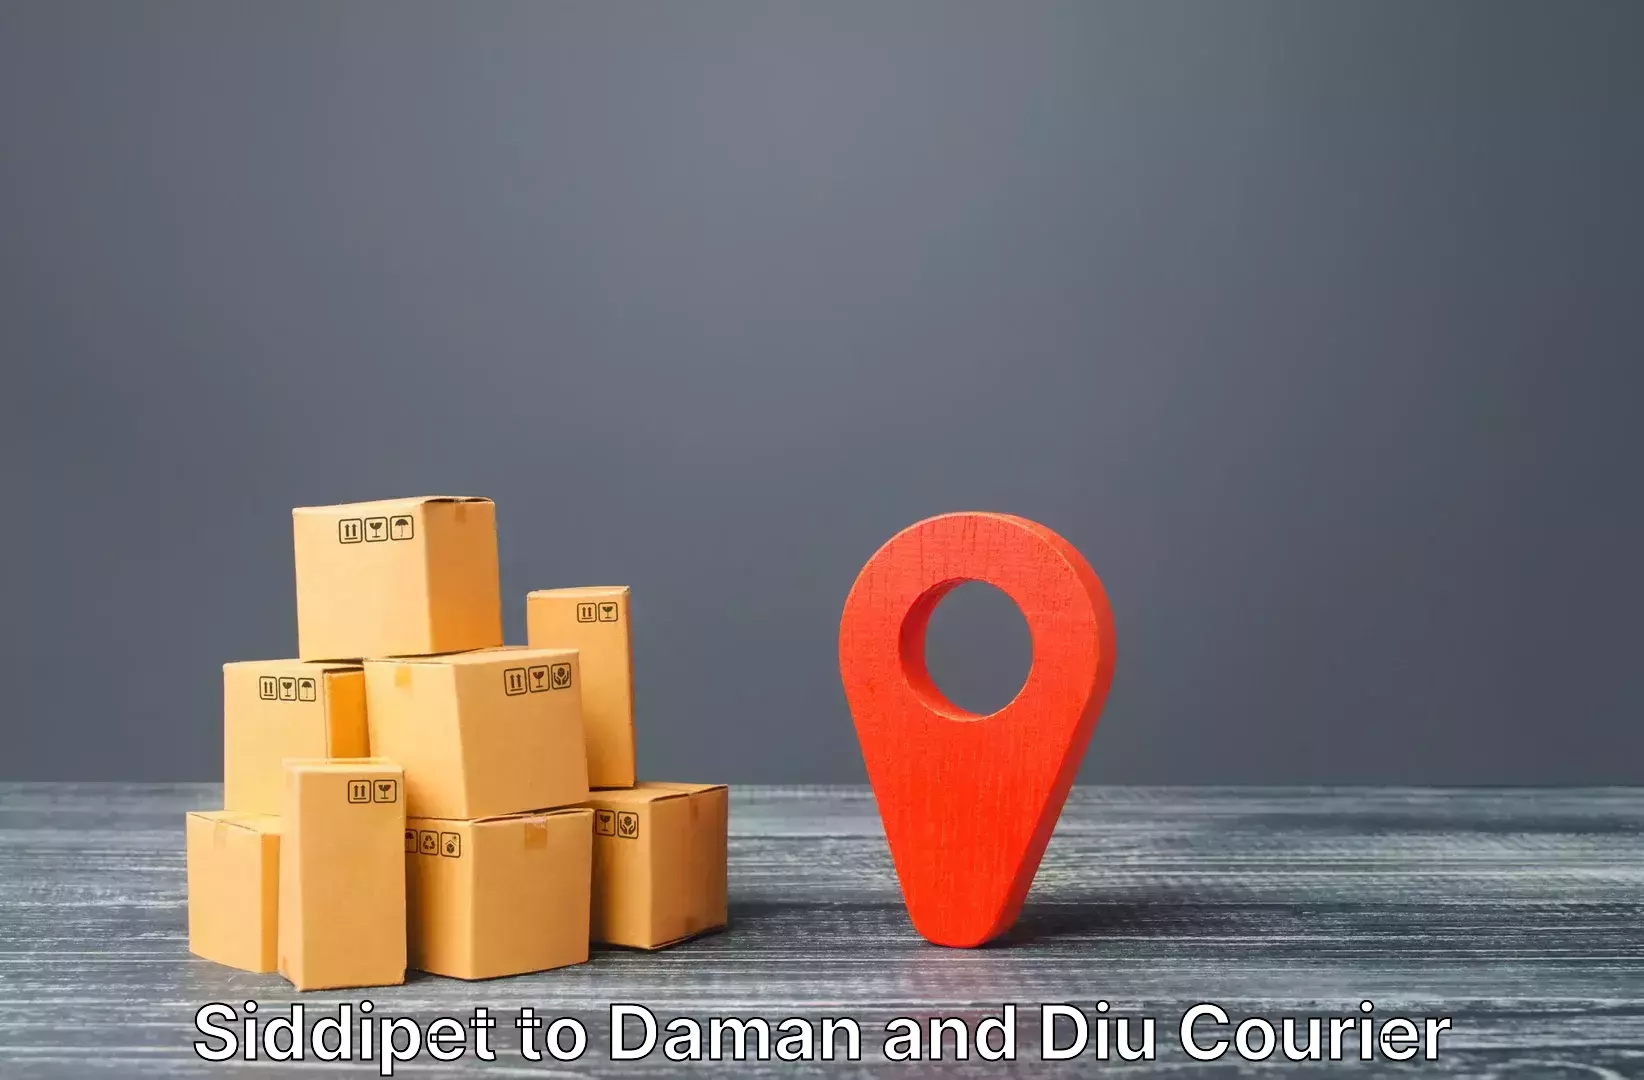 Baggage delivery solutions Siddipet to Diu